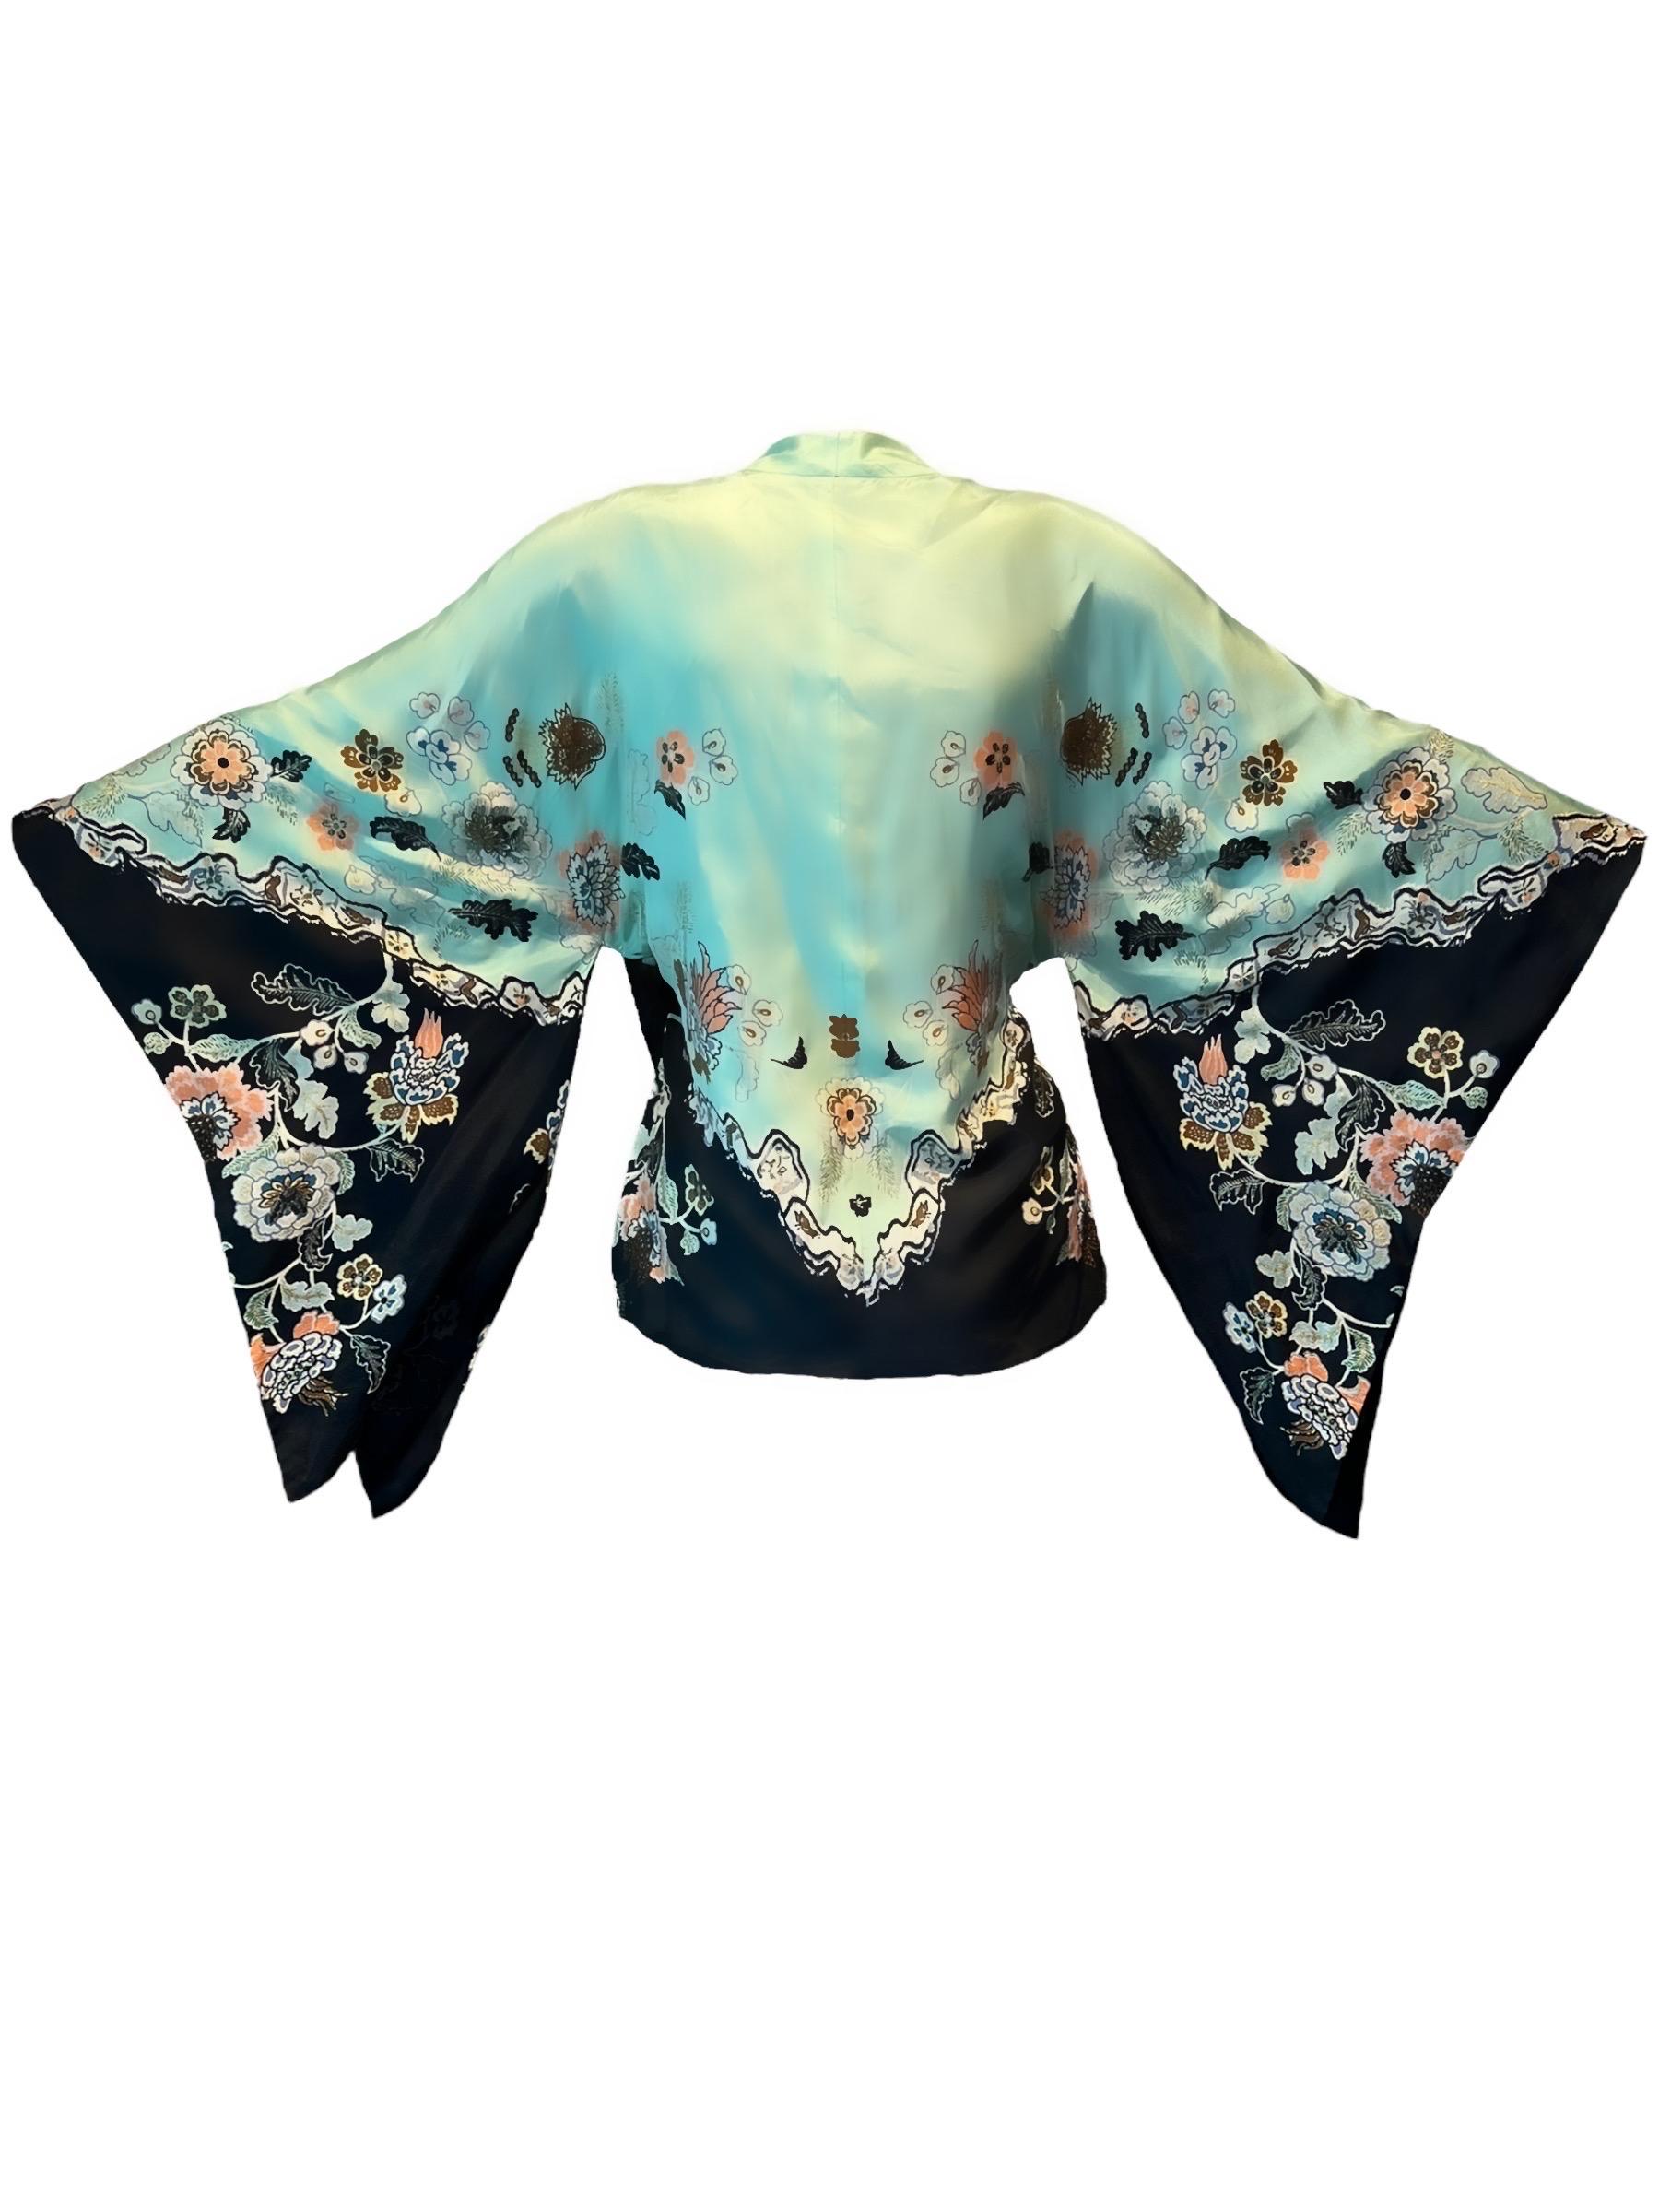 Roberto Cavalli S/S 2003 Runway Chinoiserie Print Silk Kimono Top

Look 9 form the Spring 2003 Collection.

Please note size tag has been removed.